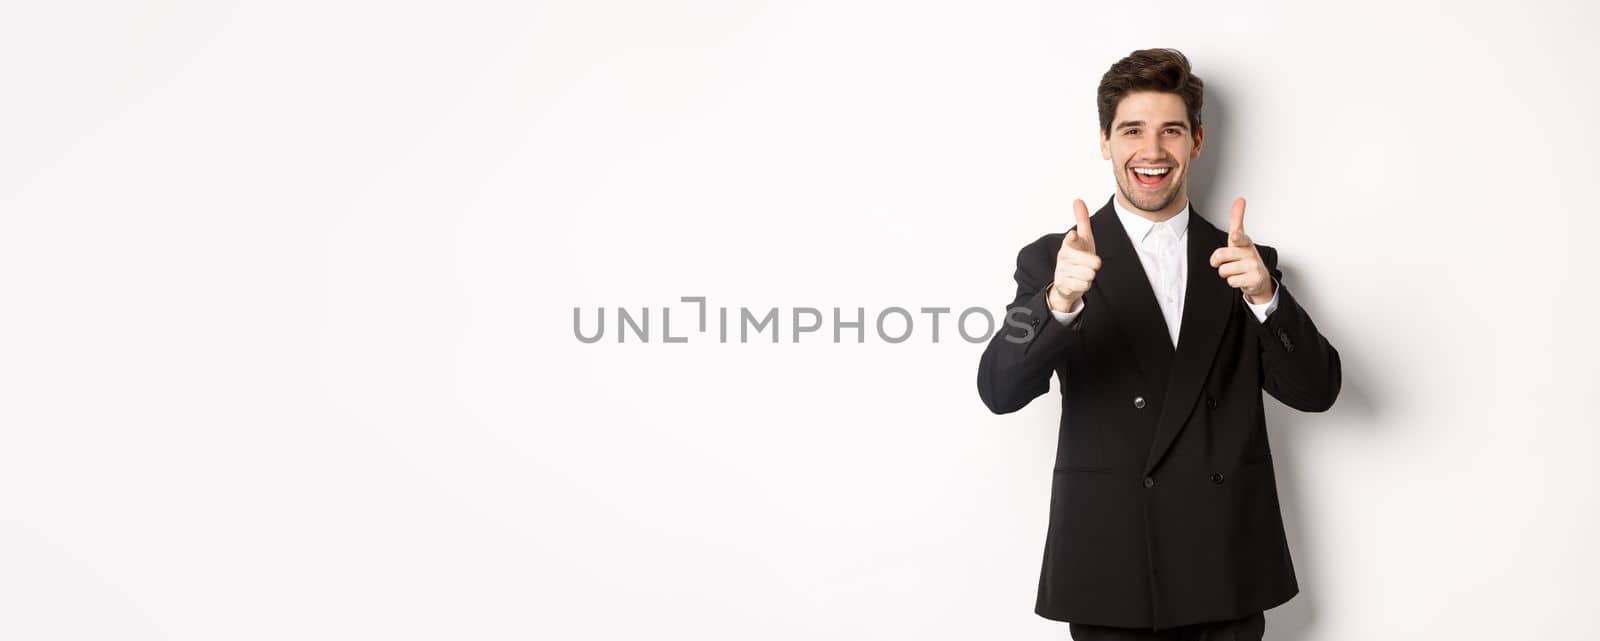 Concept of new year party, celebration and lifestyle. Handsome and successful guy in black suit, pointing fingers at camera and congratulating you, standing over white background.